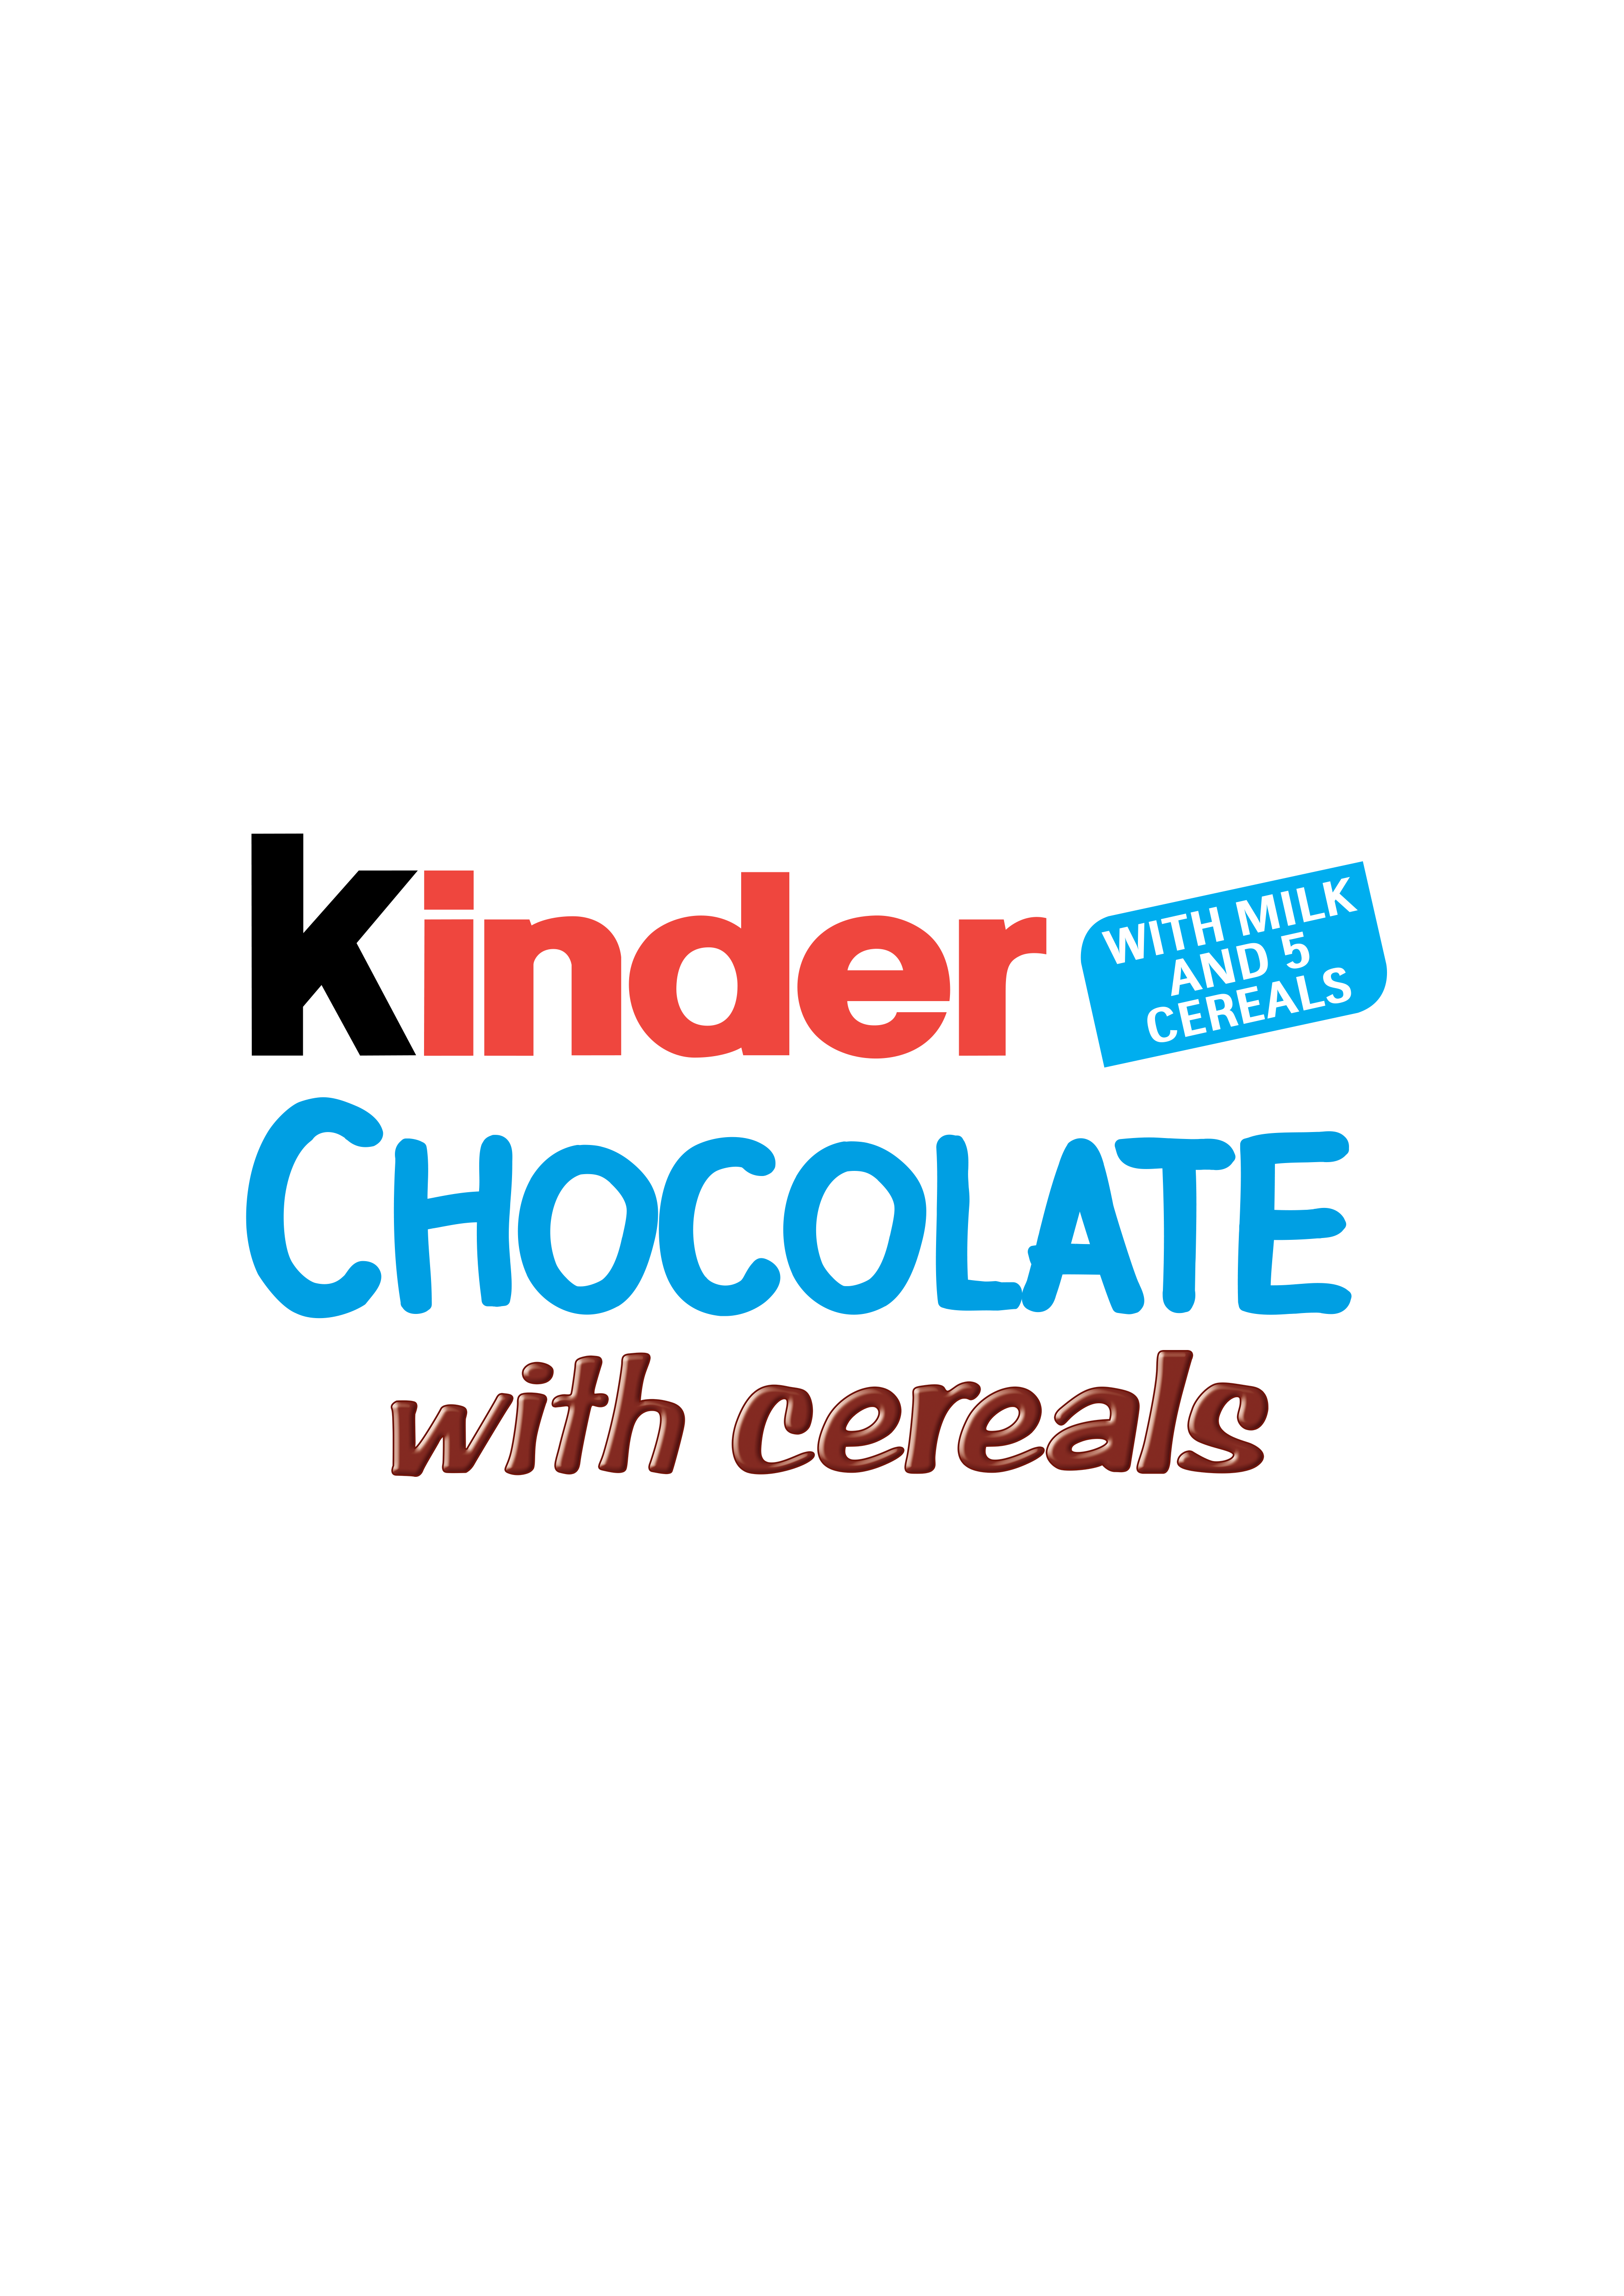 Kinder Chocolate with Cereals Logo